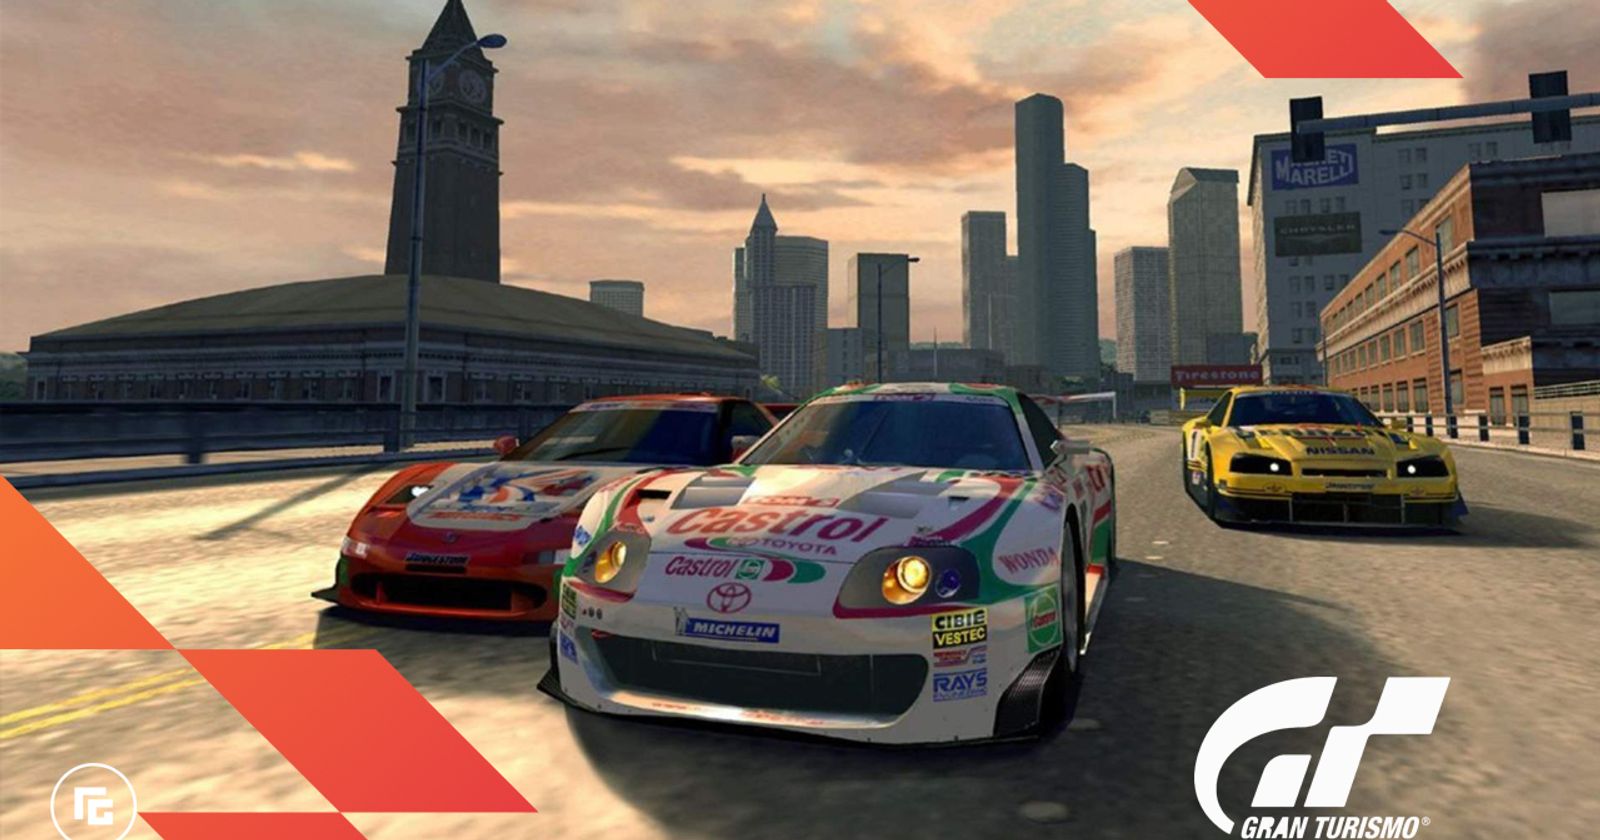 What is the best Gran Turismo game ever?